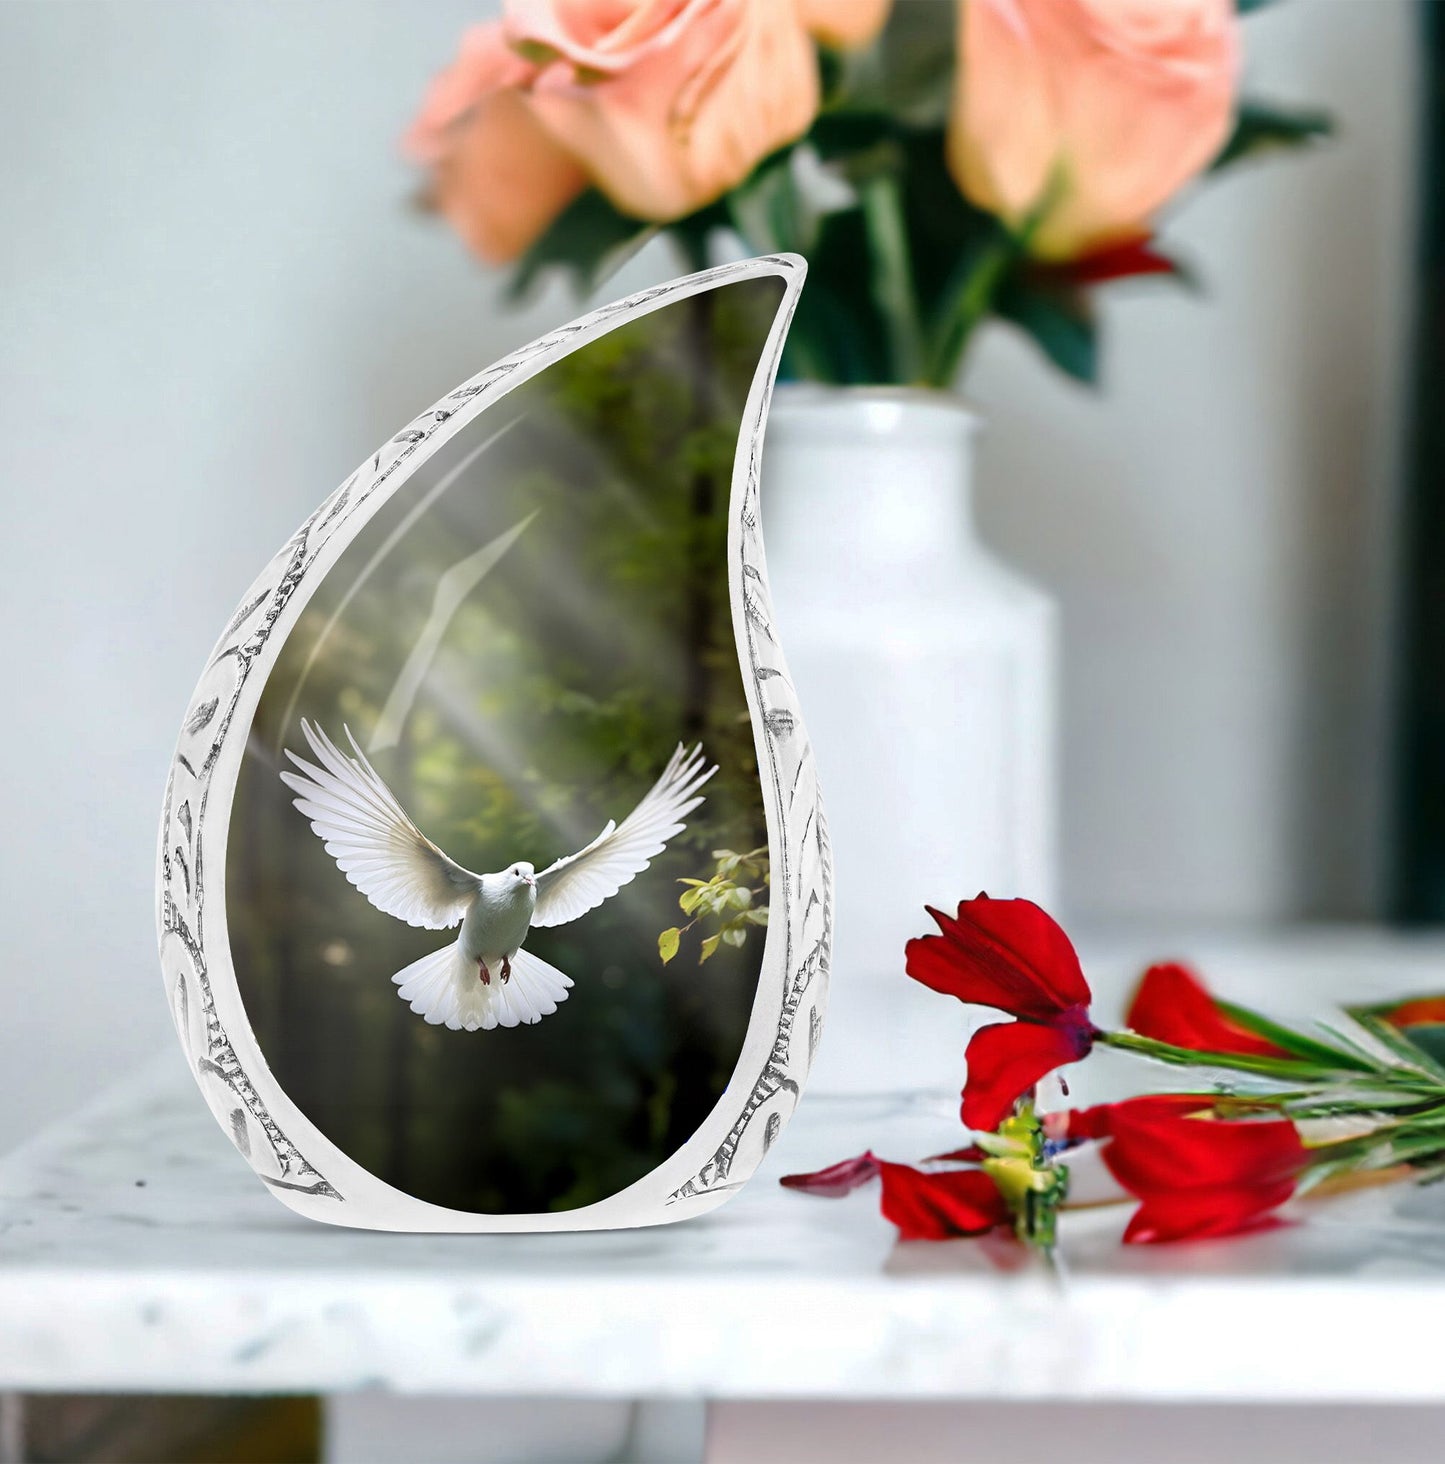 Large Dove-themed cremation urn with peaceful dove design against a dark background, perfect for adult human ashes